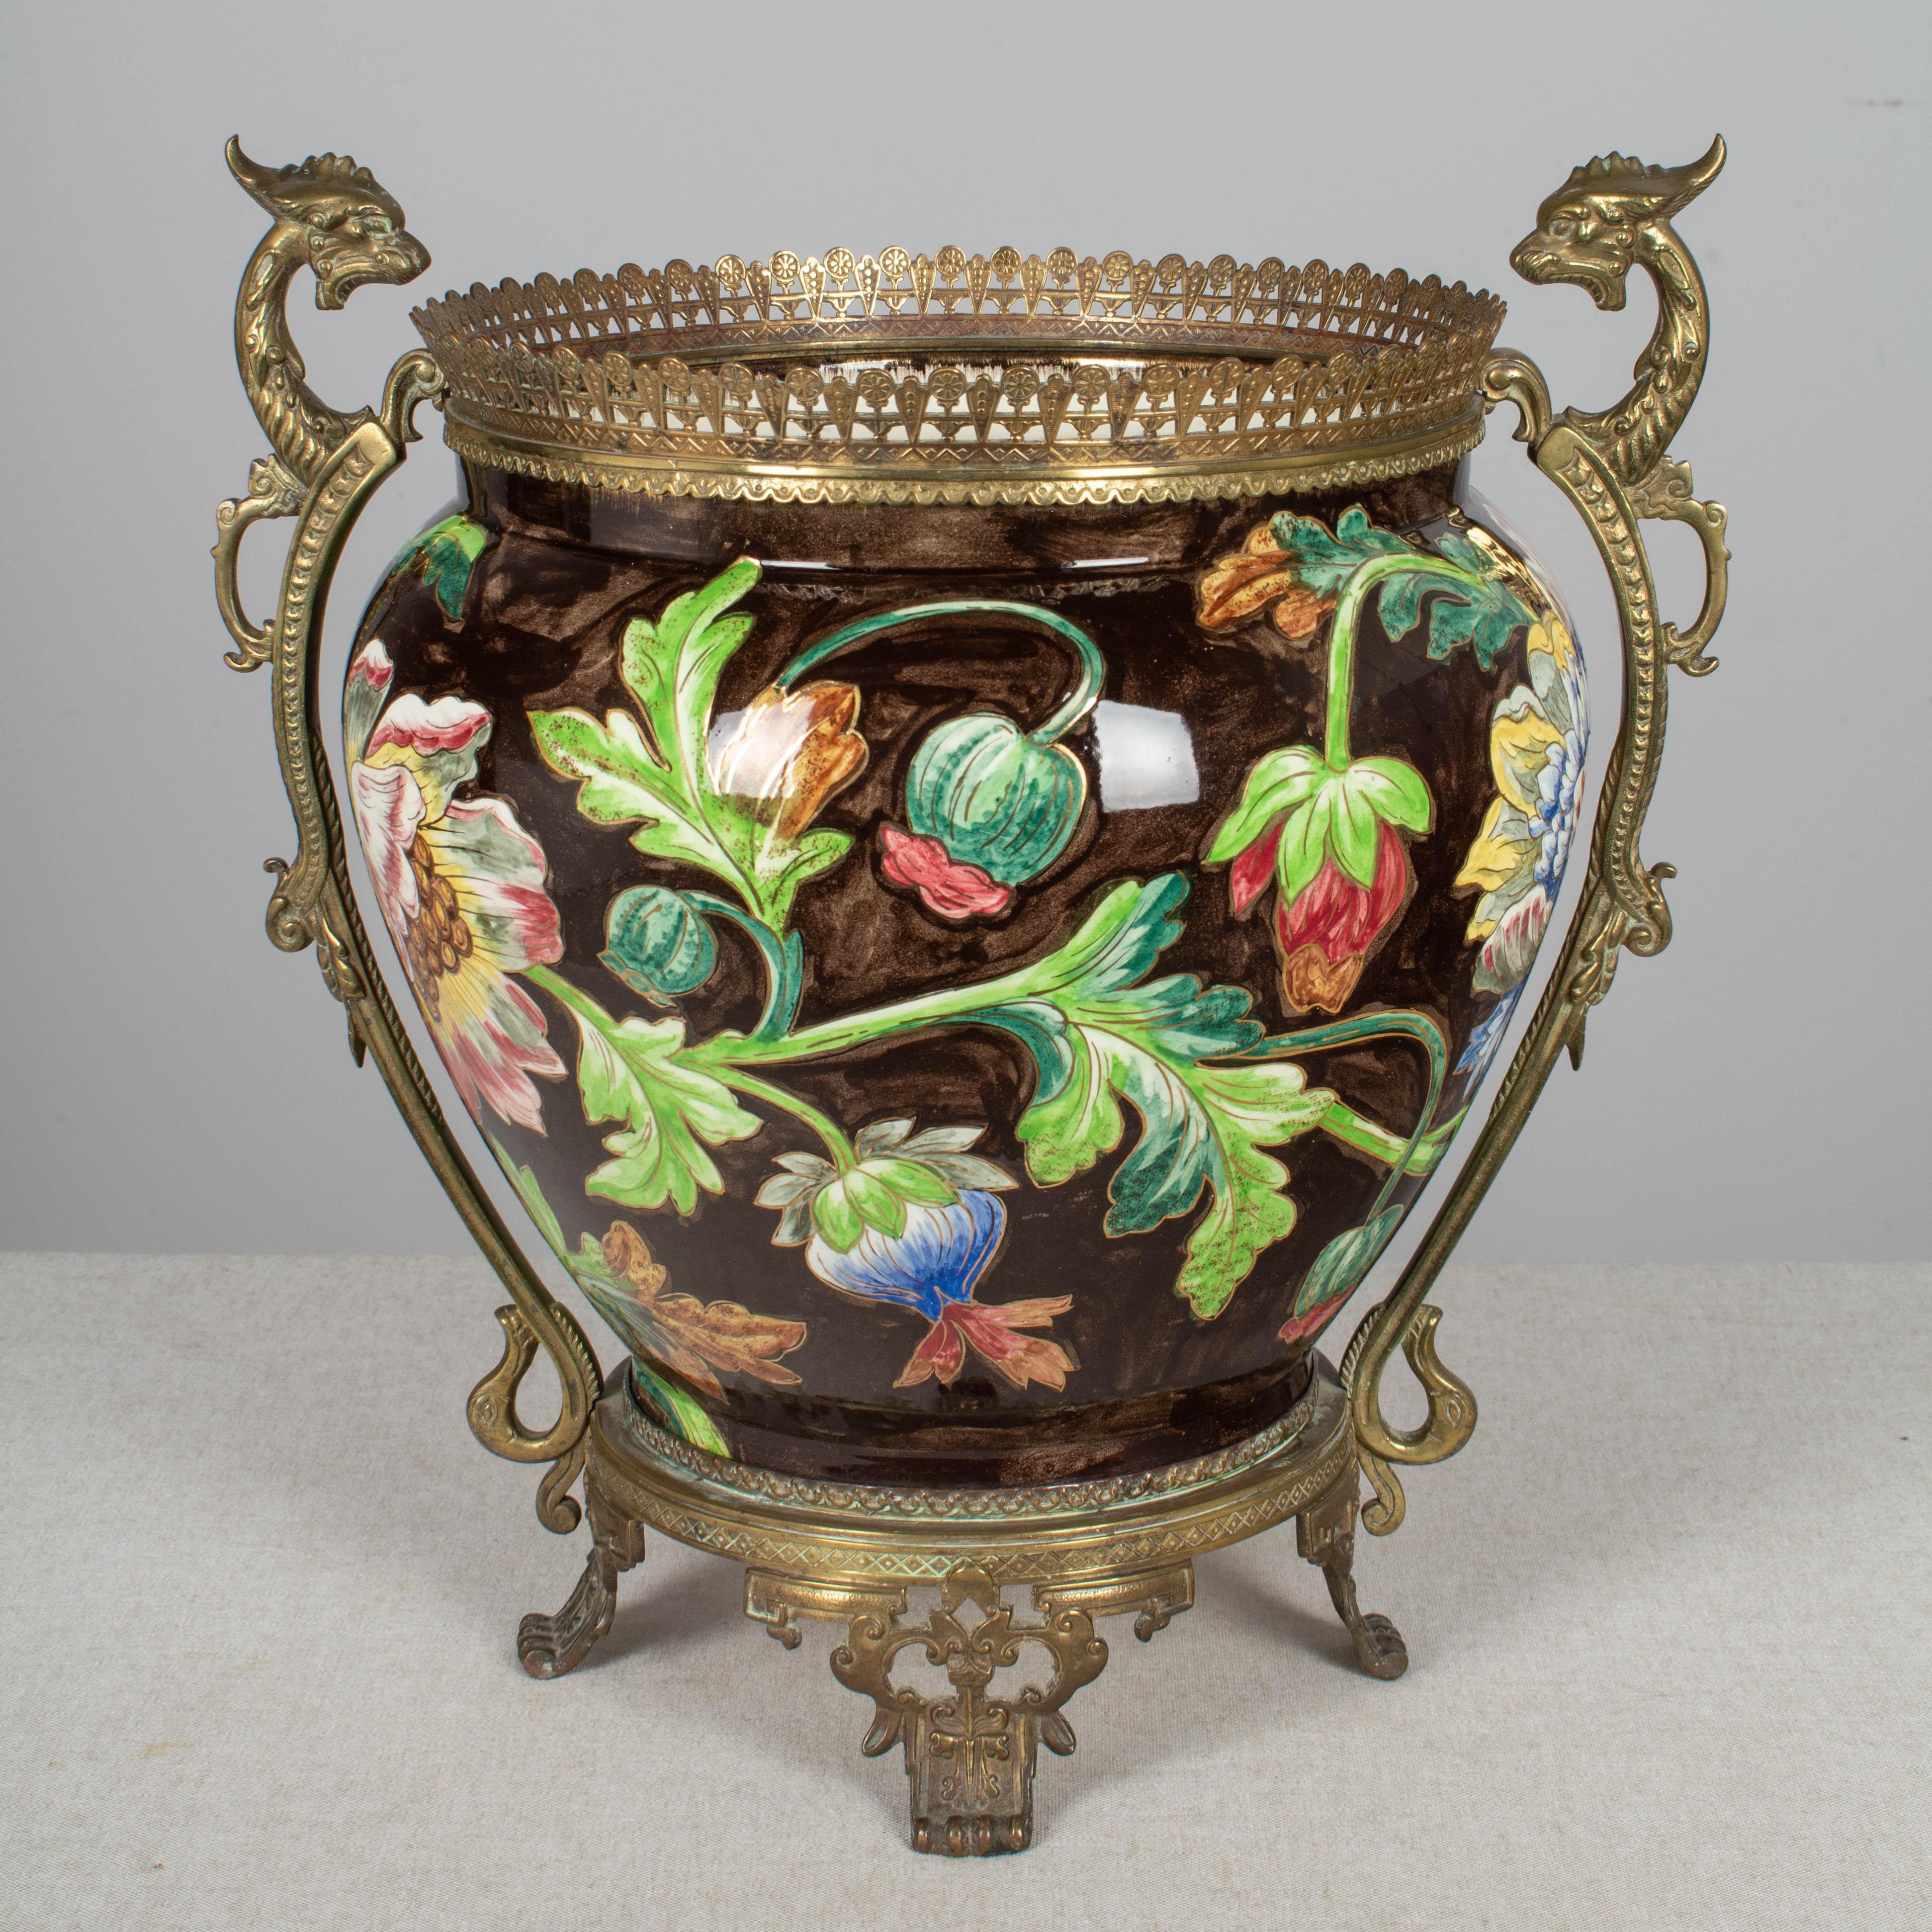 A large French Art Nouveau bronze mounted glazed ceramic planter or cachepot from Longchamp, Burgundy. Vibrant hand painted colorful flowers with bright green foliage and metallic gold accents are dramatically offset on a dark brown ground.